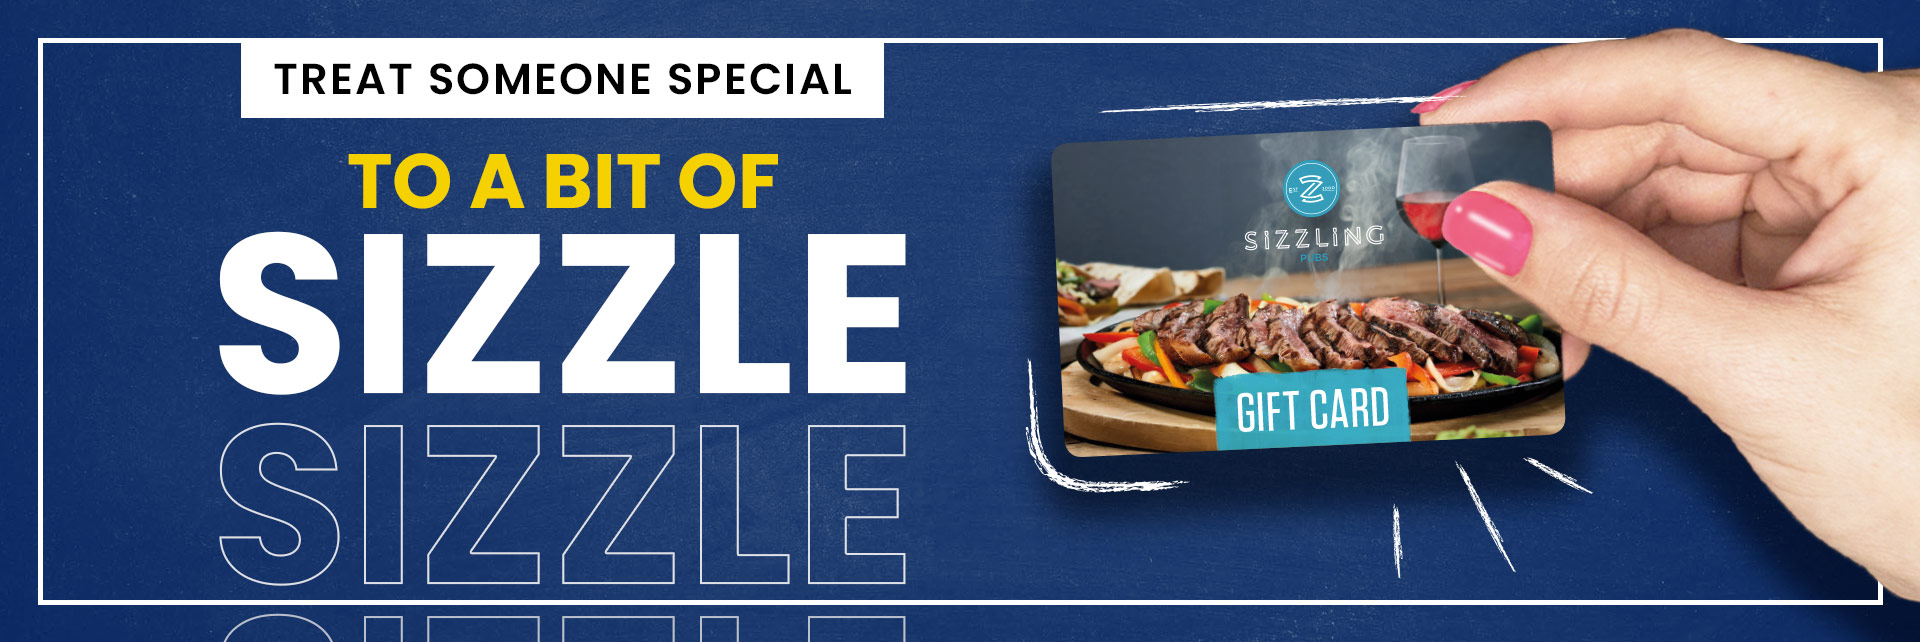 Sizzling Pubs Gift Card at The Royal Oak in Stafford